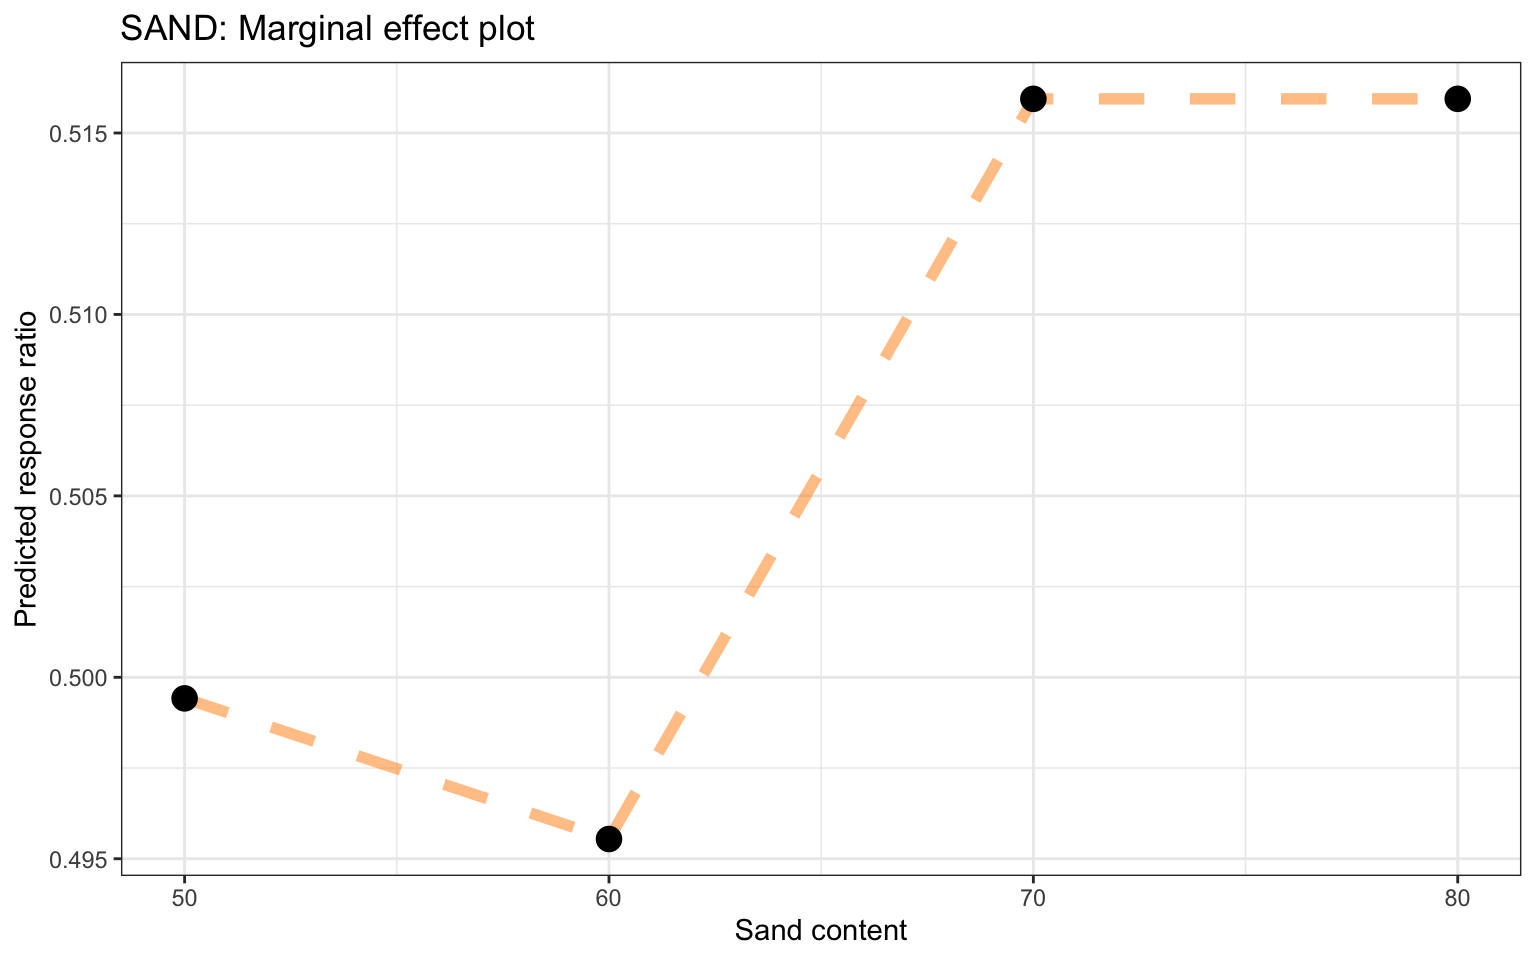 Marginal effects plot for sand content based on the RF model